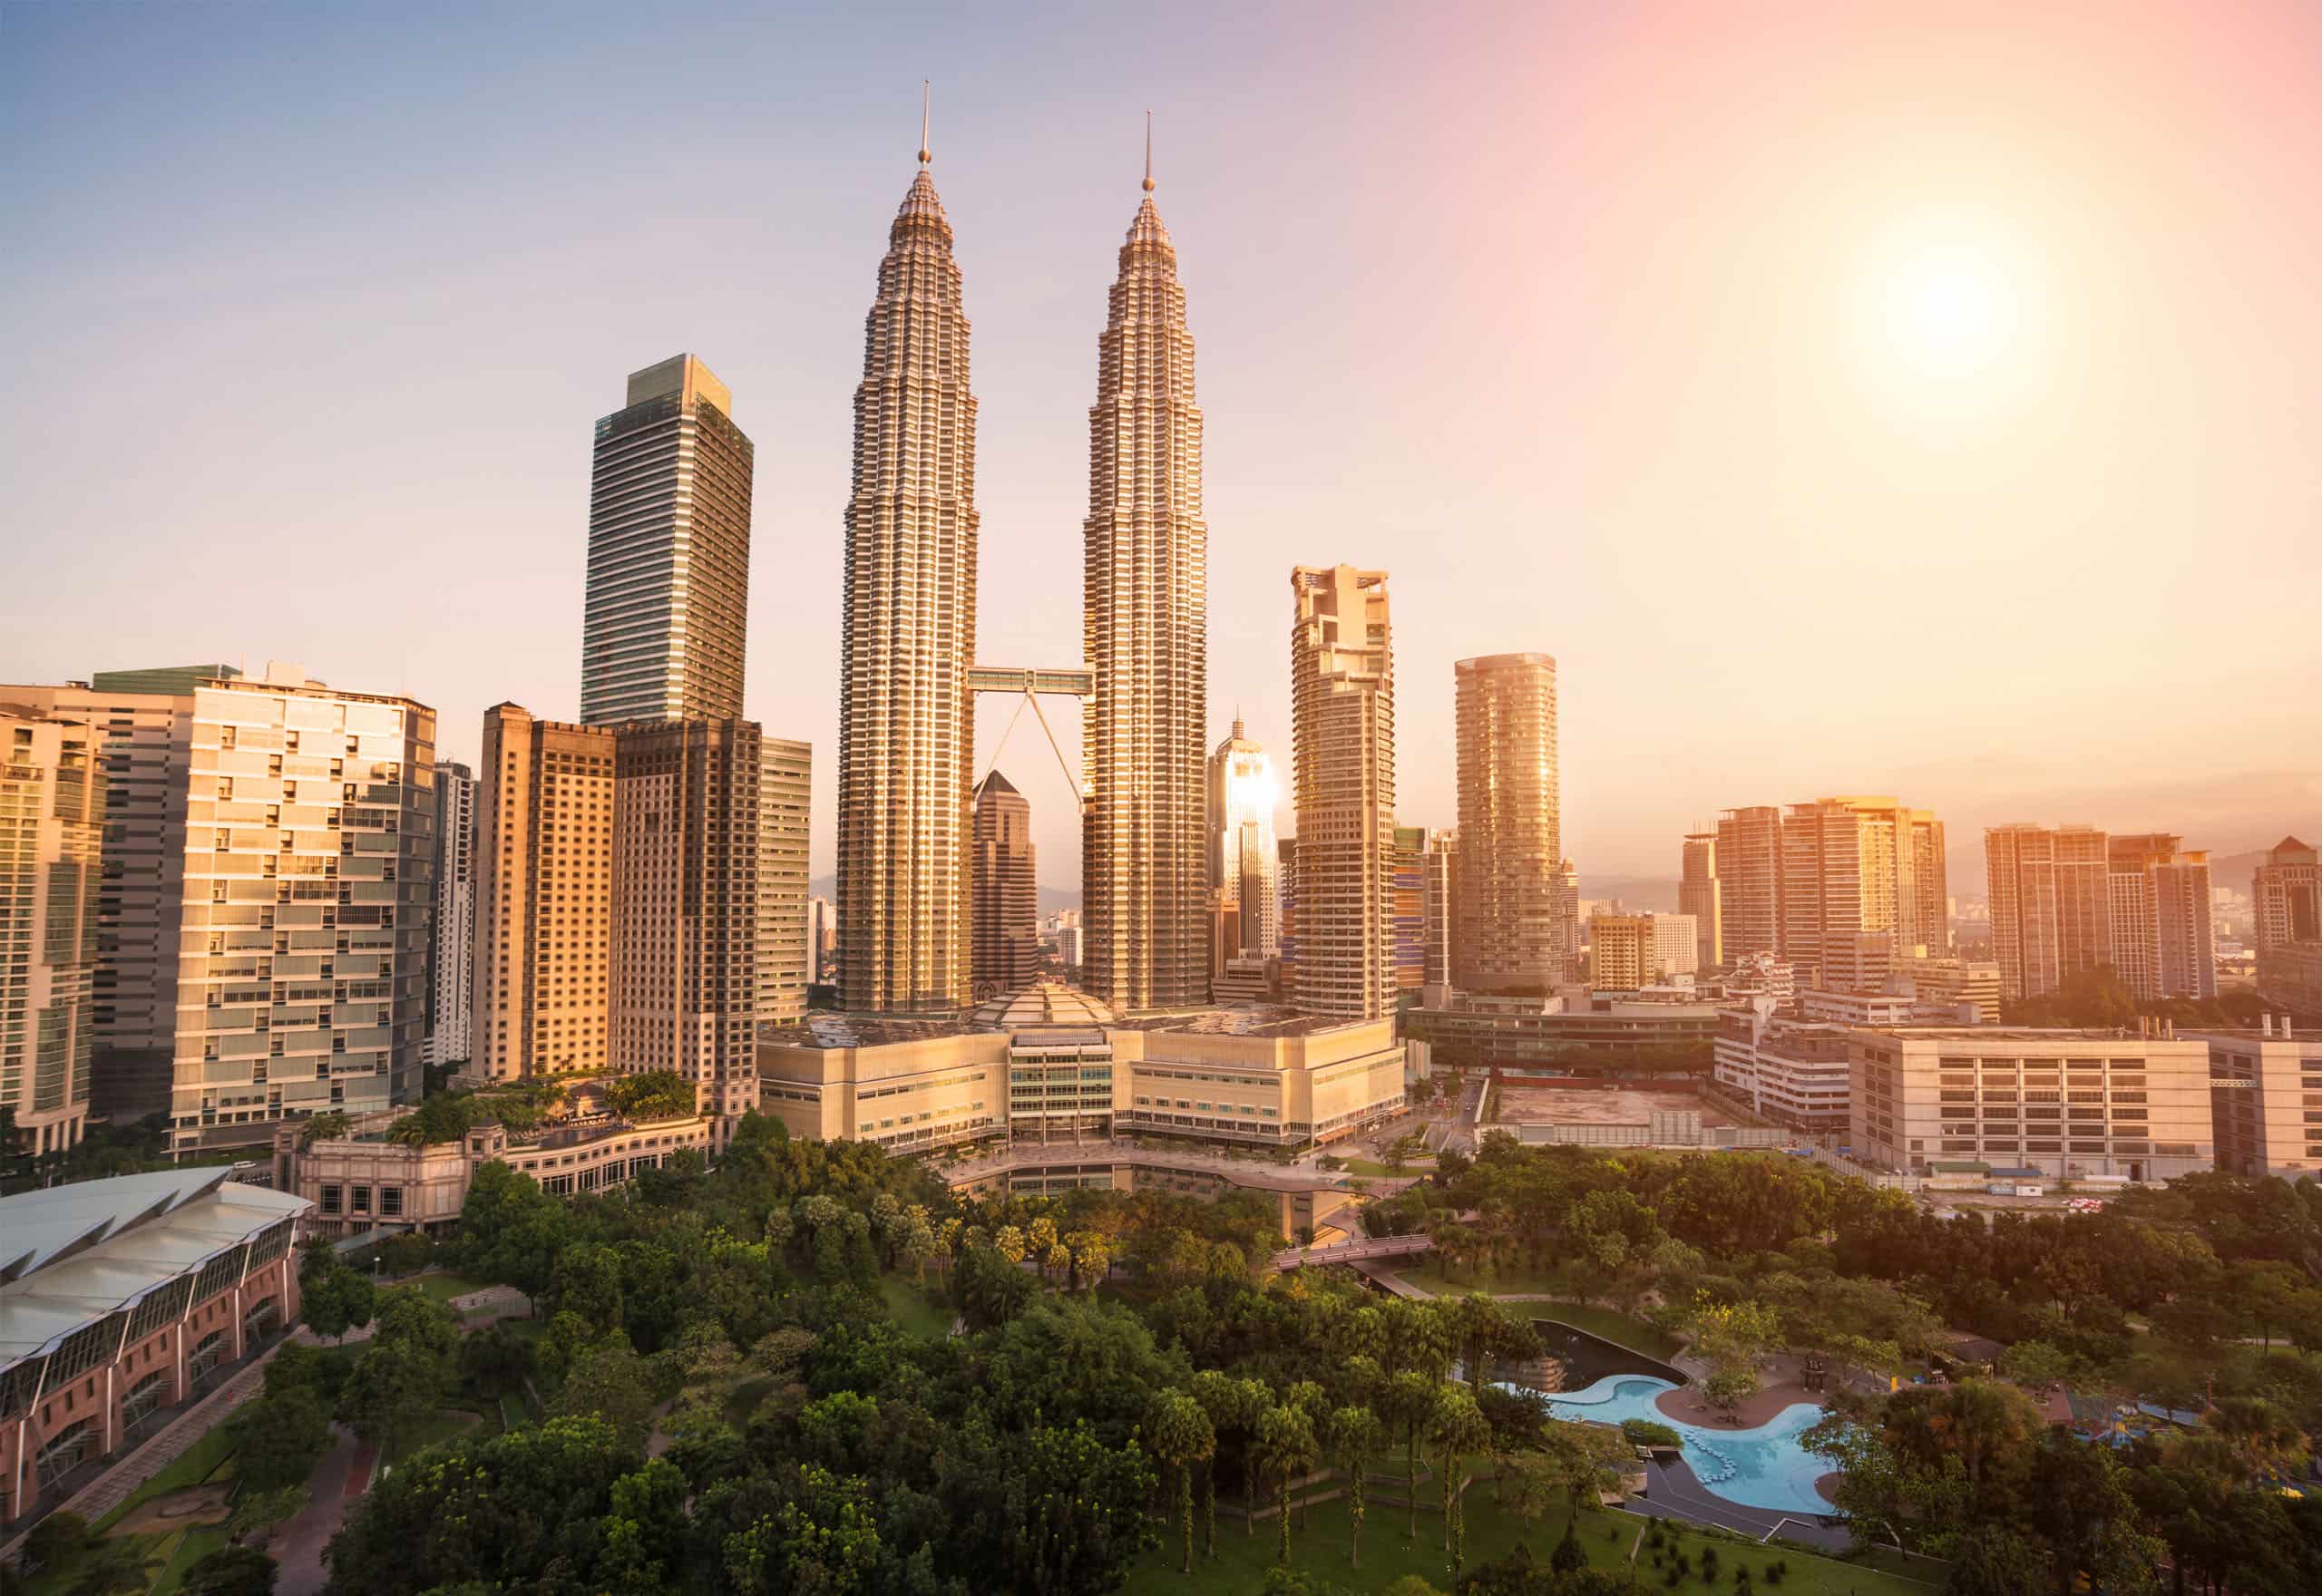 Finance , Accounting and Budgeting Courses in Kuala Lumpur